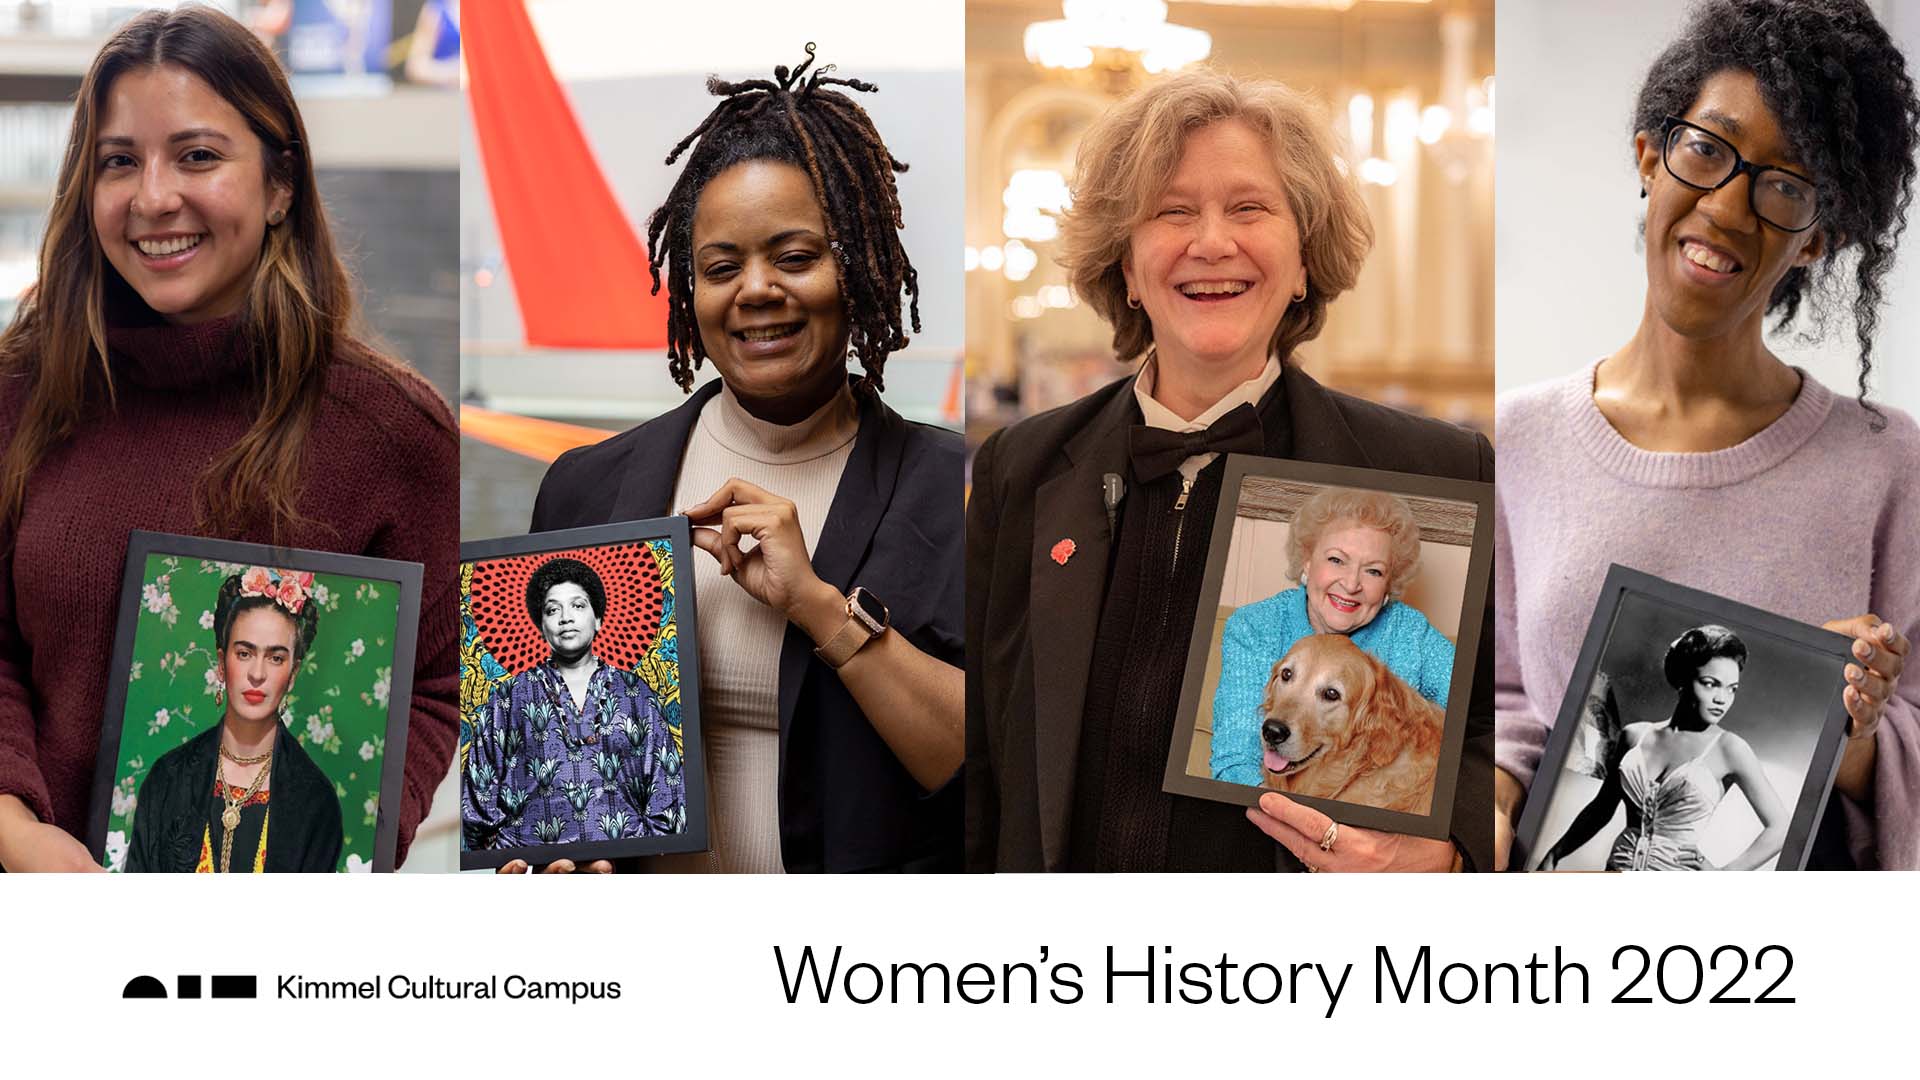 Four women stand holding a photo frame with a famous woman, celebrating Women's History Month on the Kimmel Cultural Campus